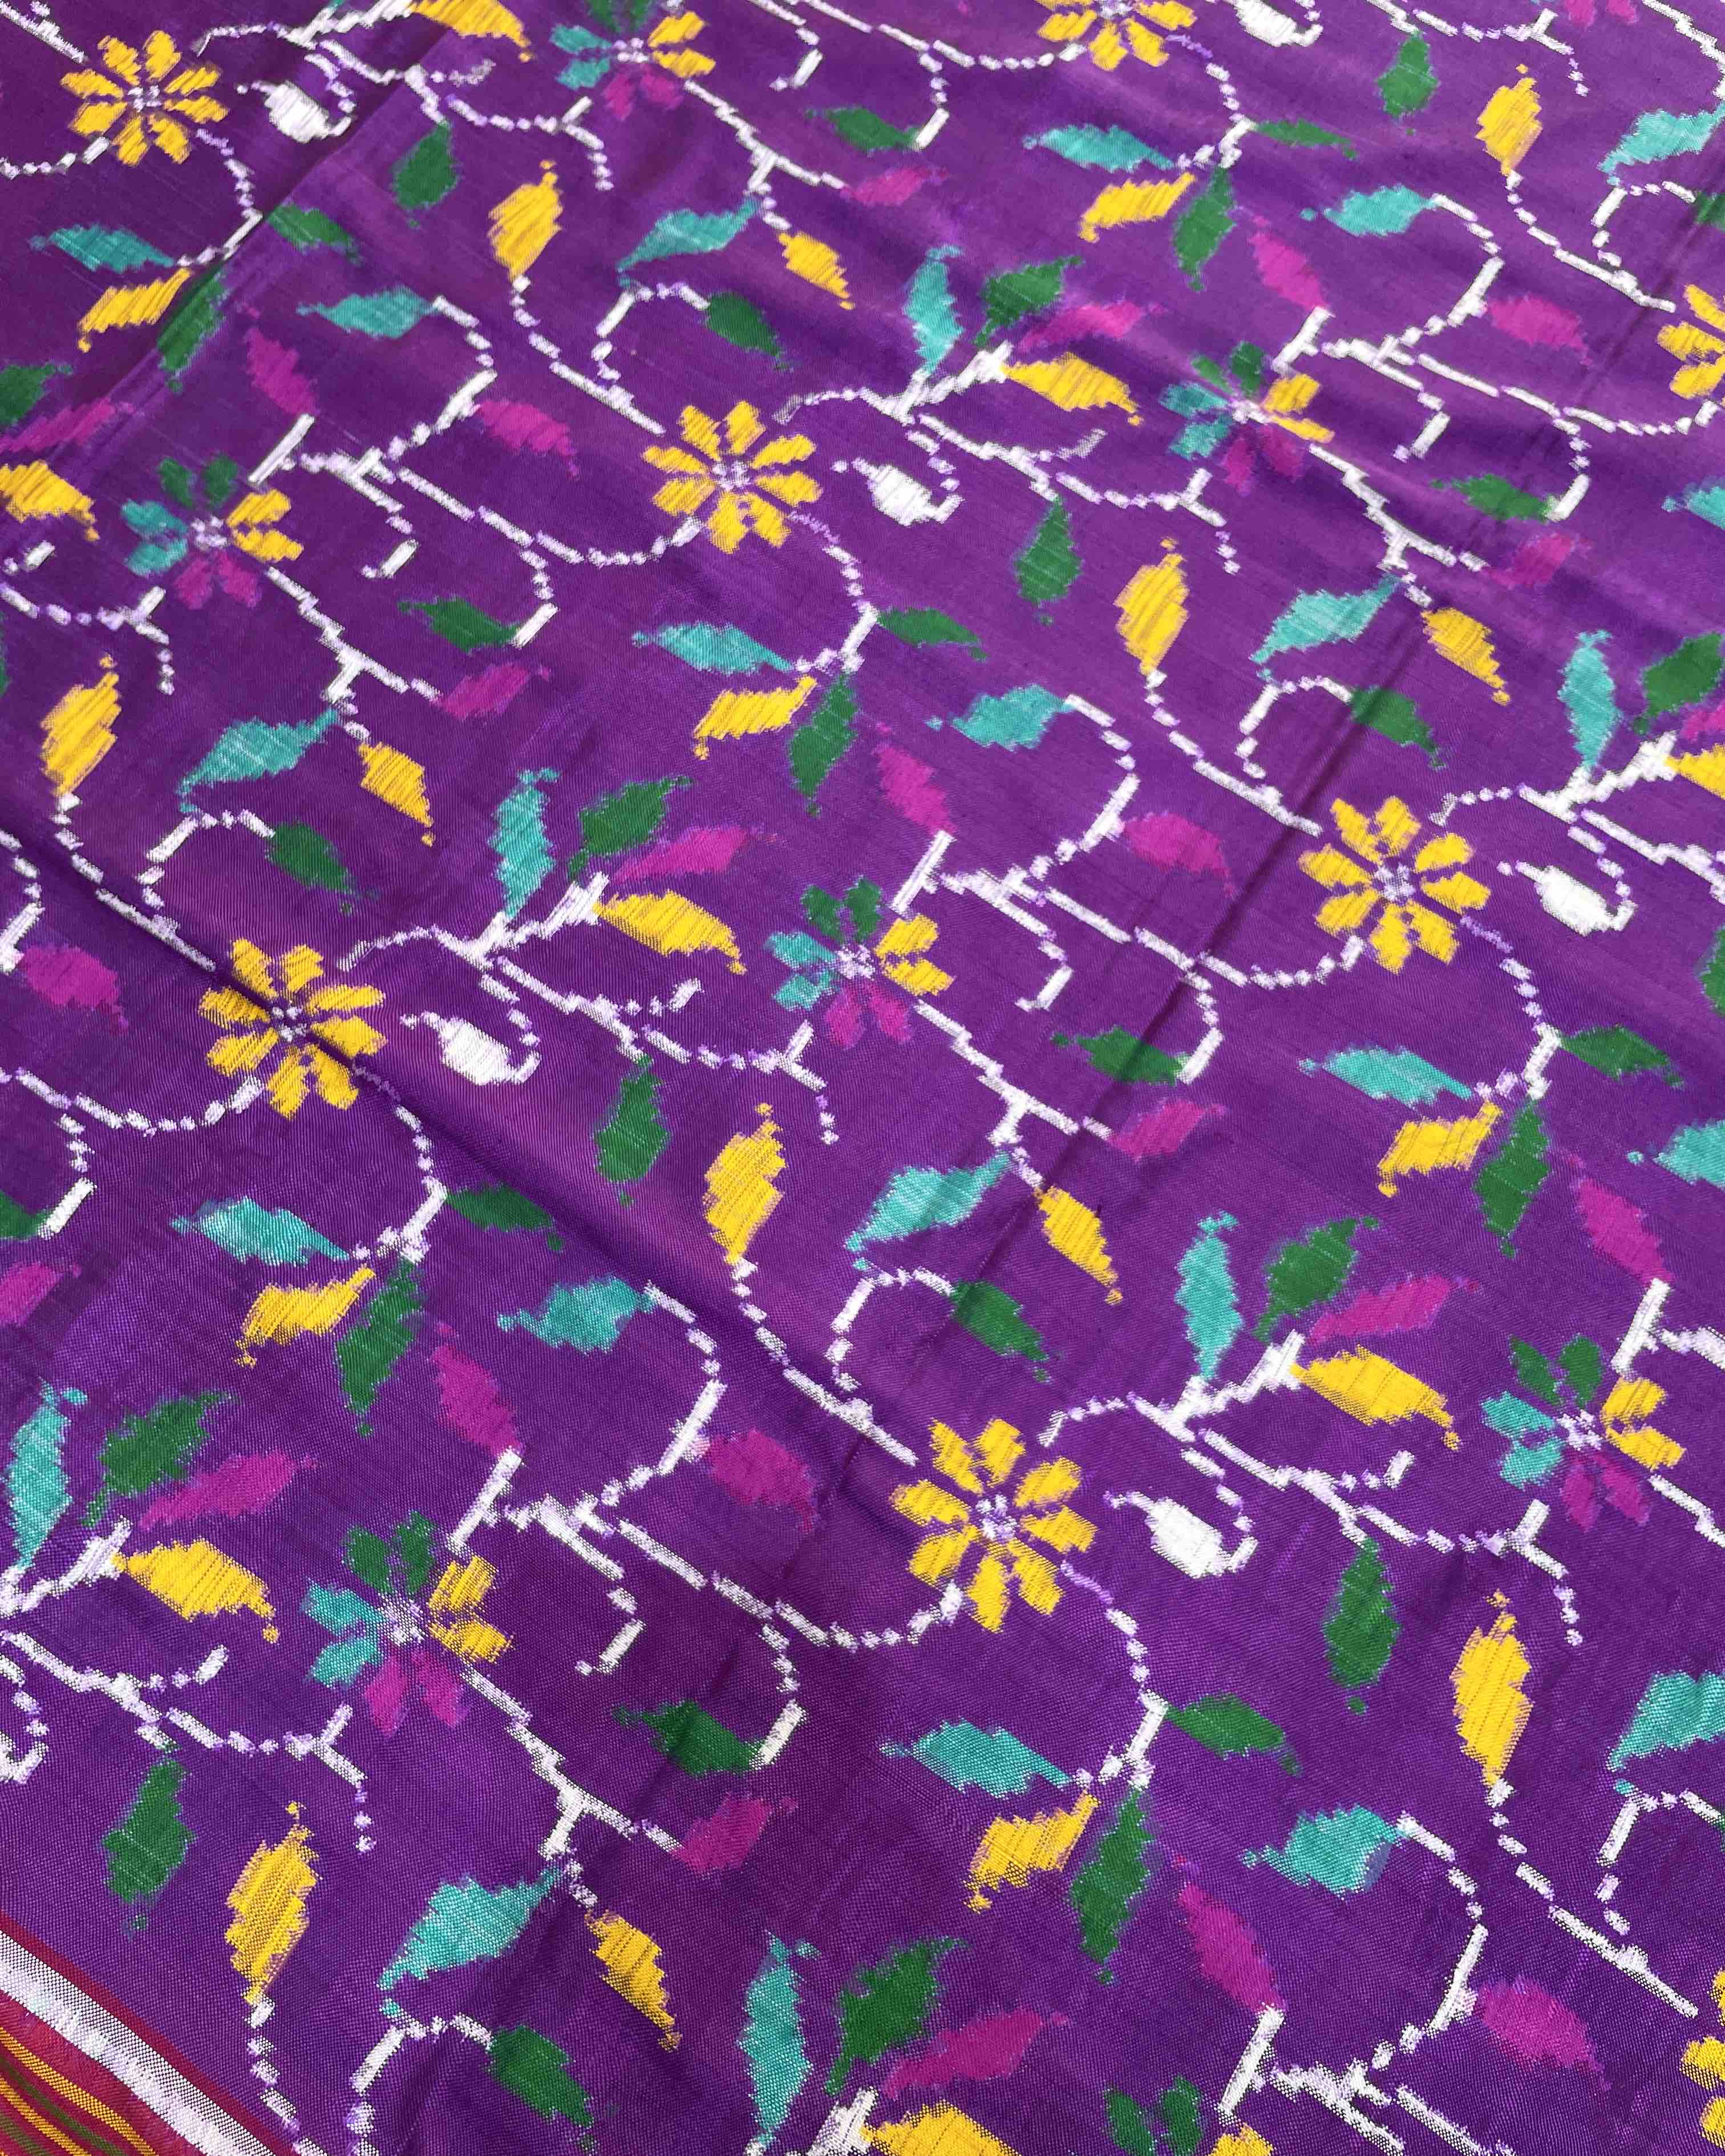 Red & Purple Leaves Fancy Patola Saree